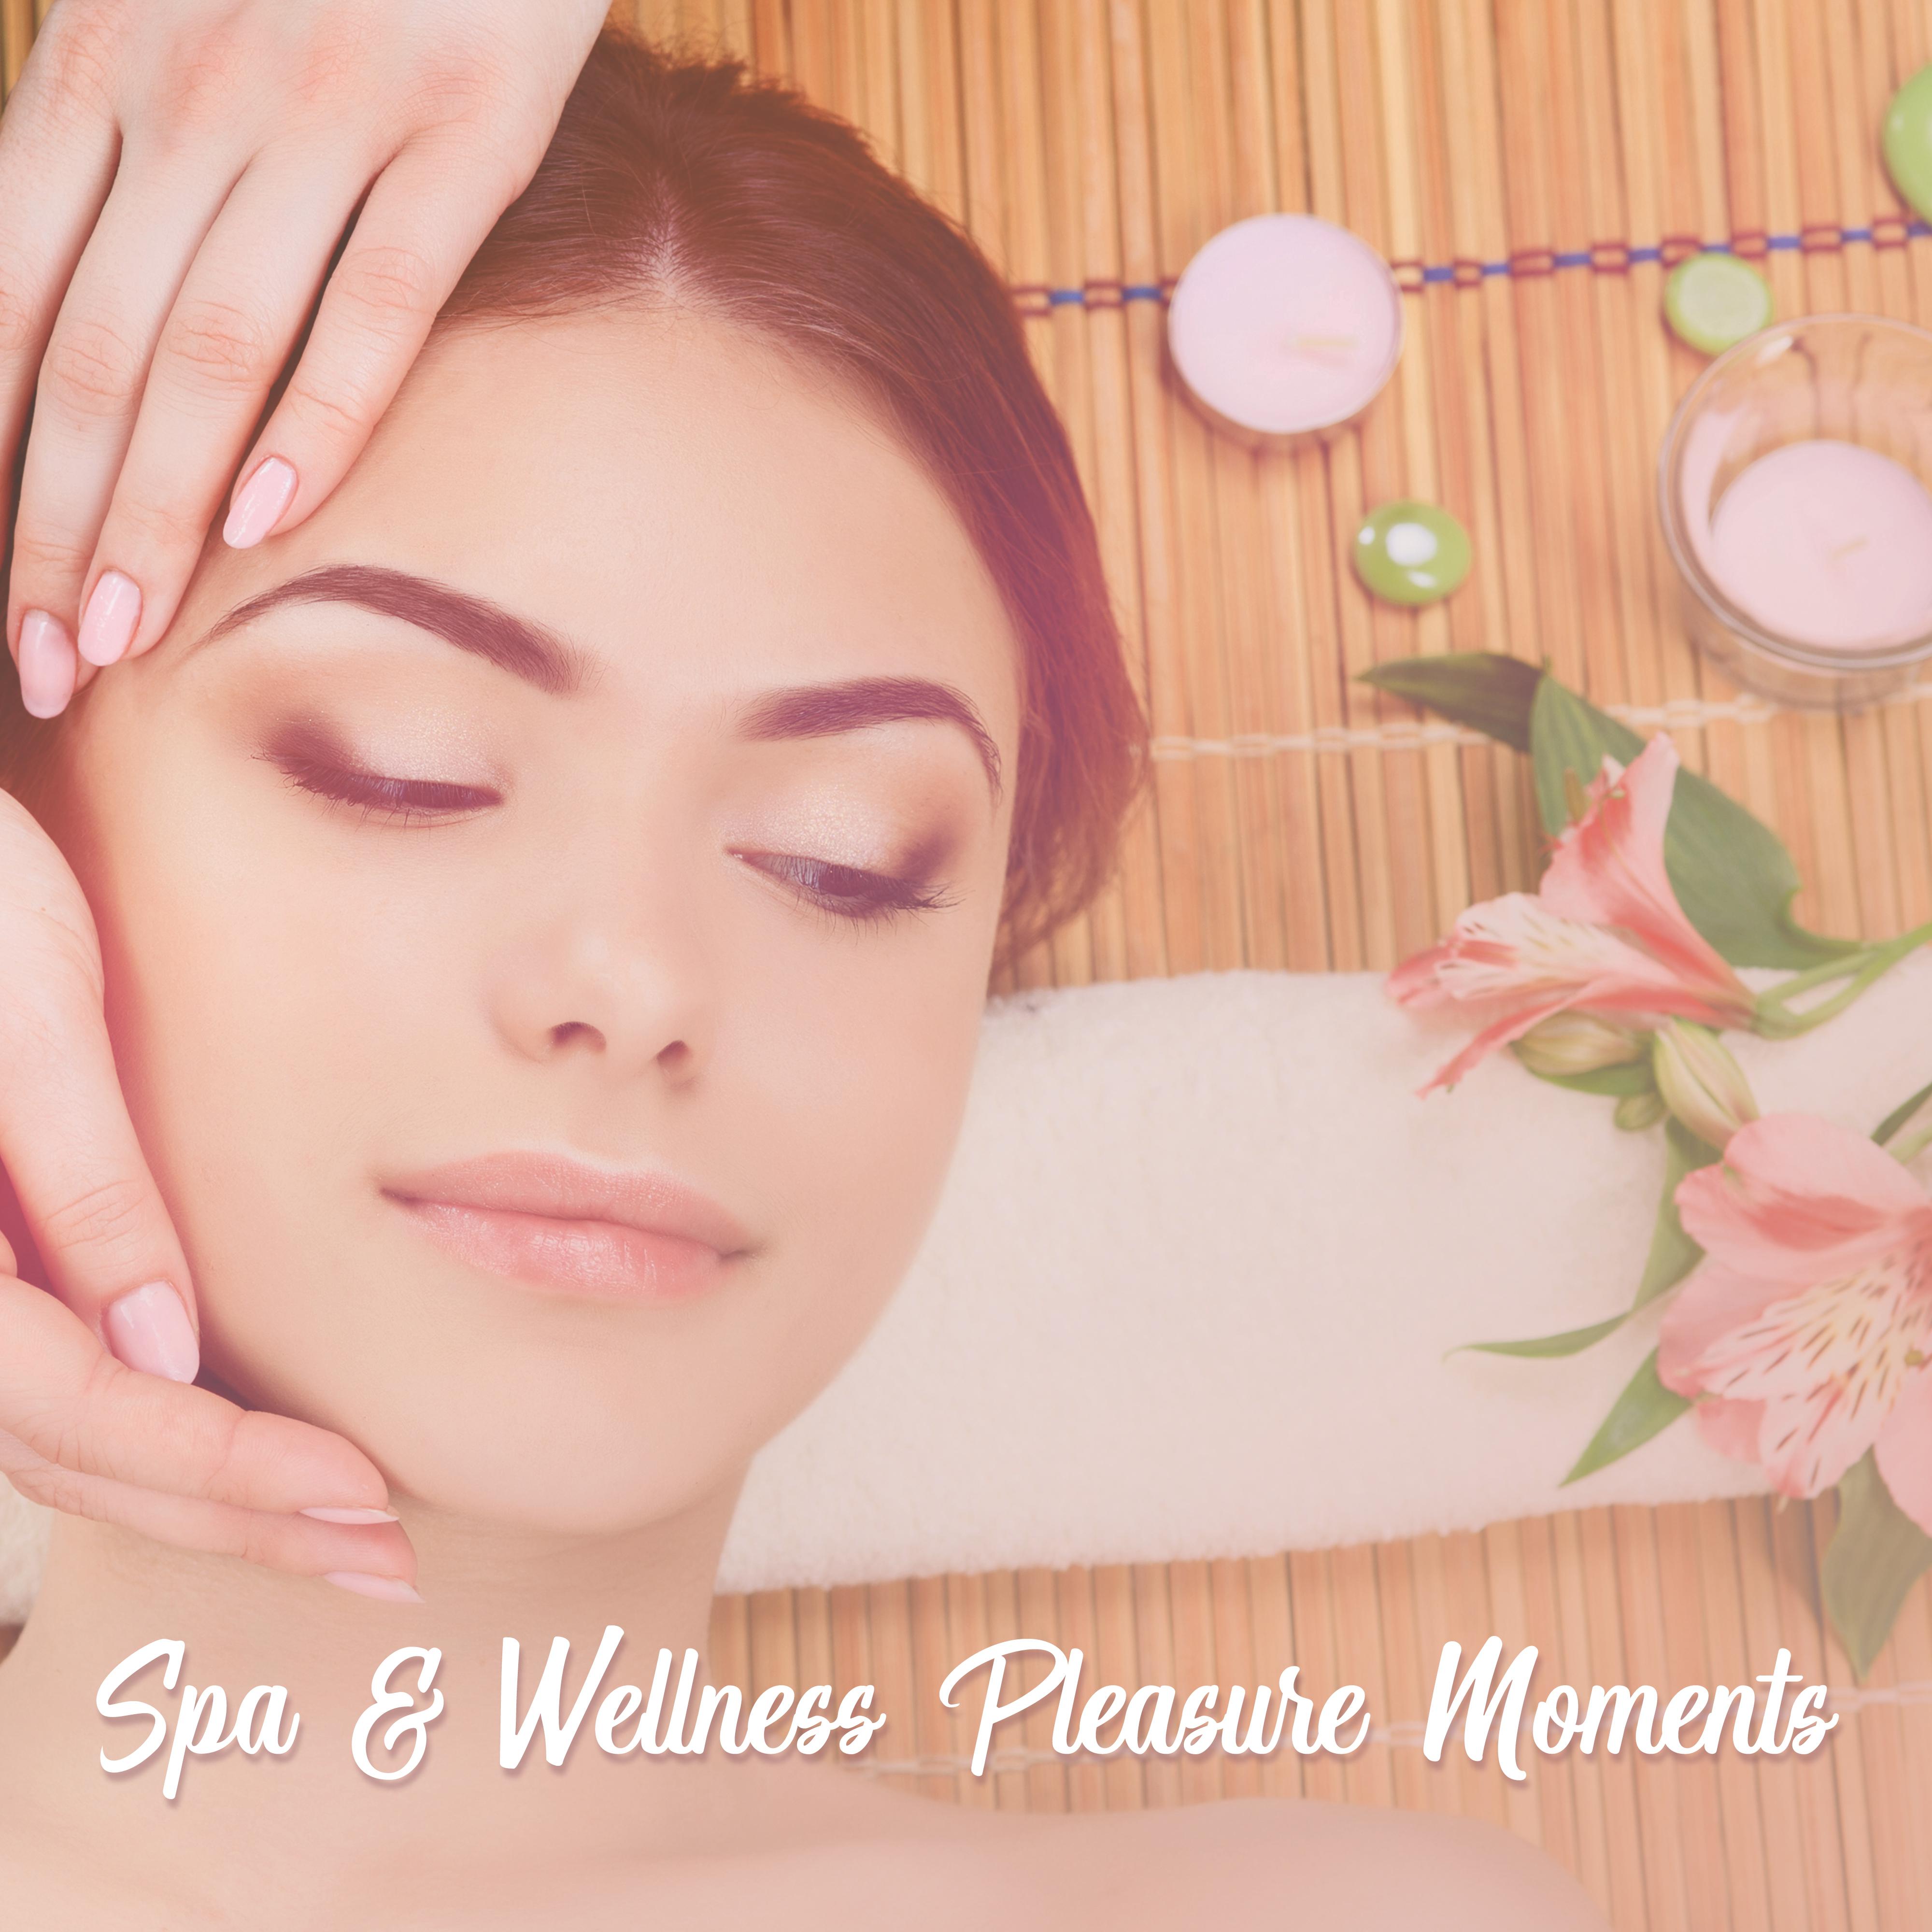 Spa  Wellness Pleasure Moments  Relaxation Massage New Age Music